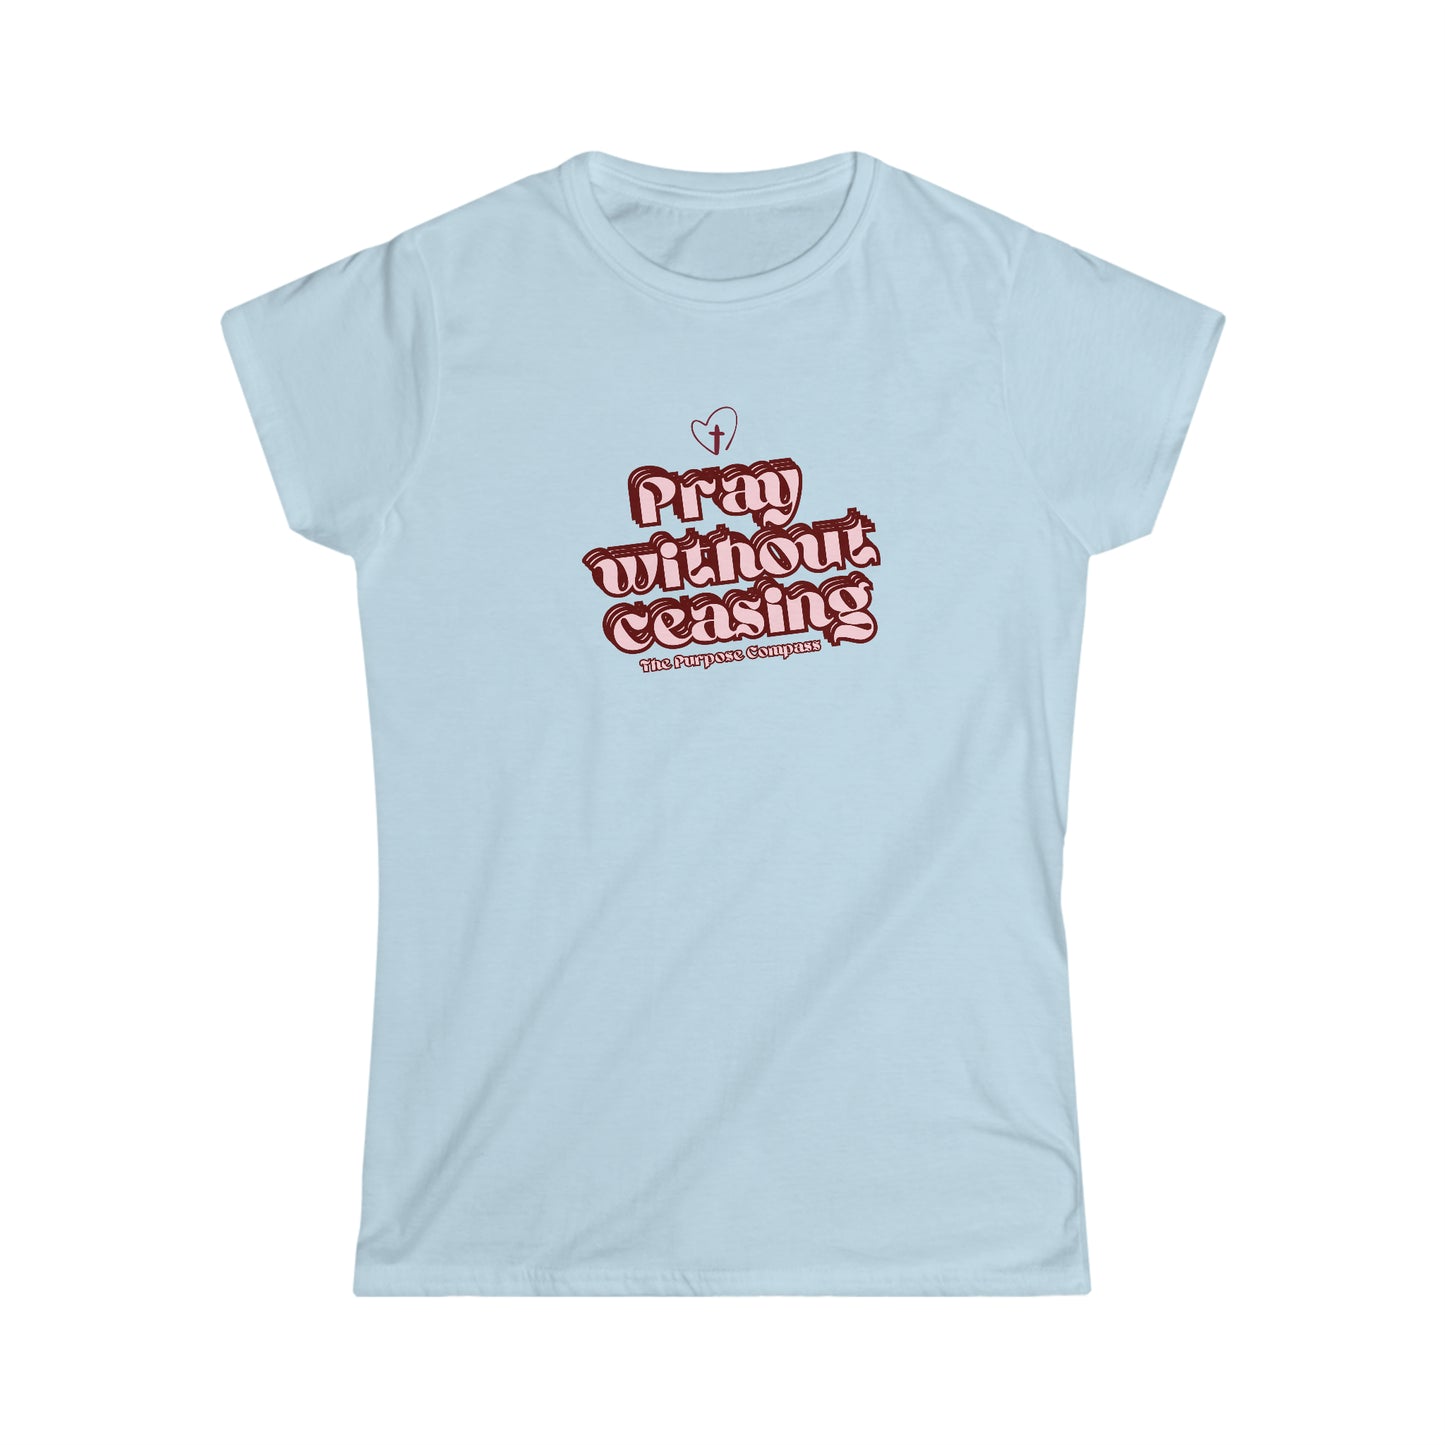 PRAY WITHOUT CEASING Woman's Tee